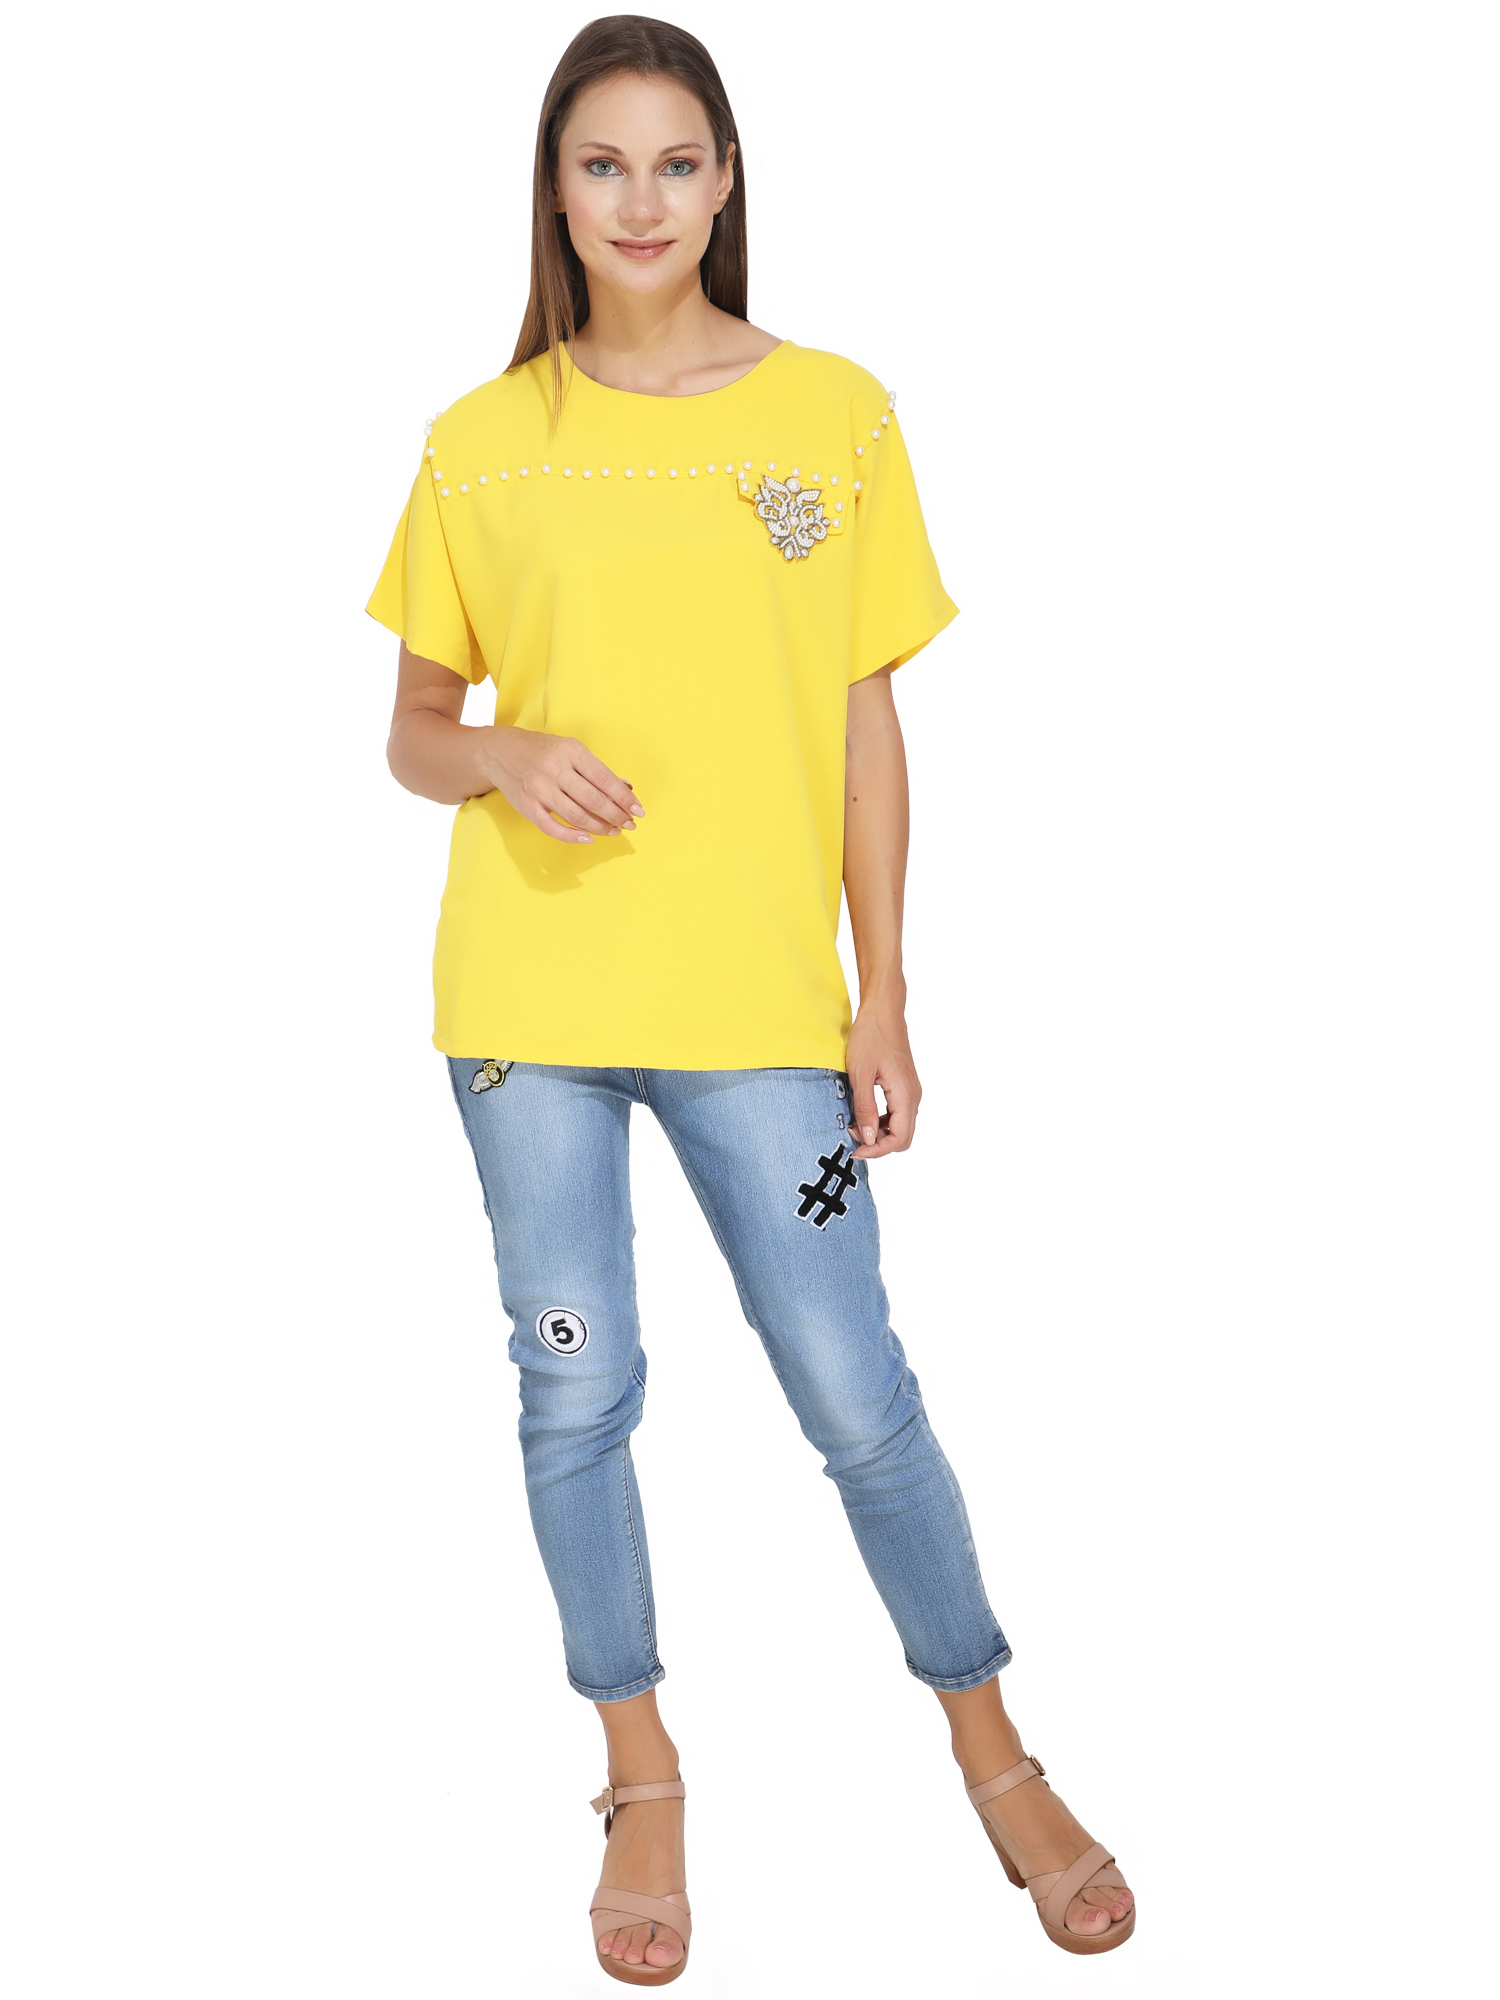 White Pearl Studded Yellow T-Shirt